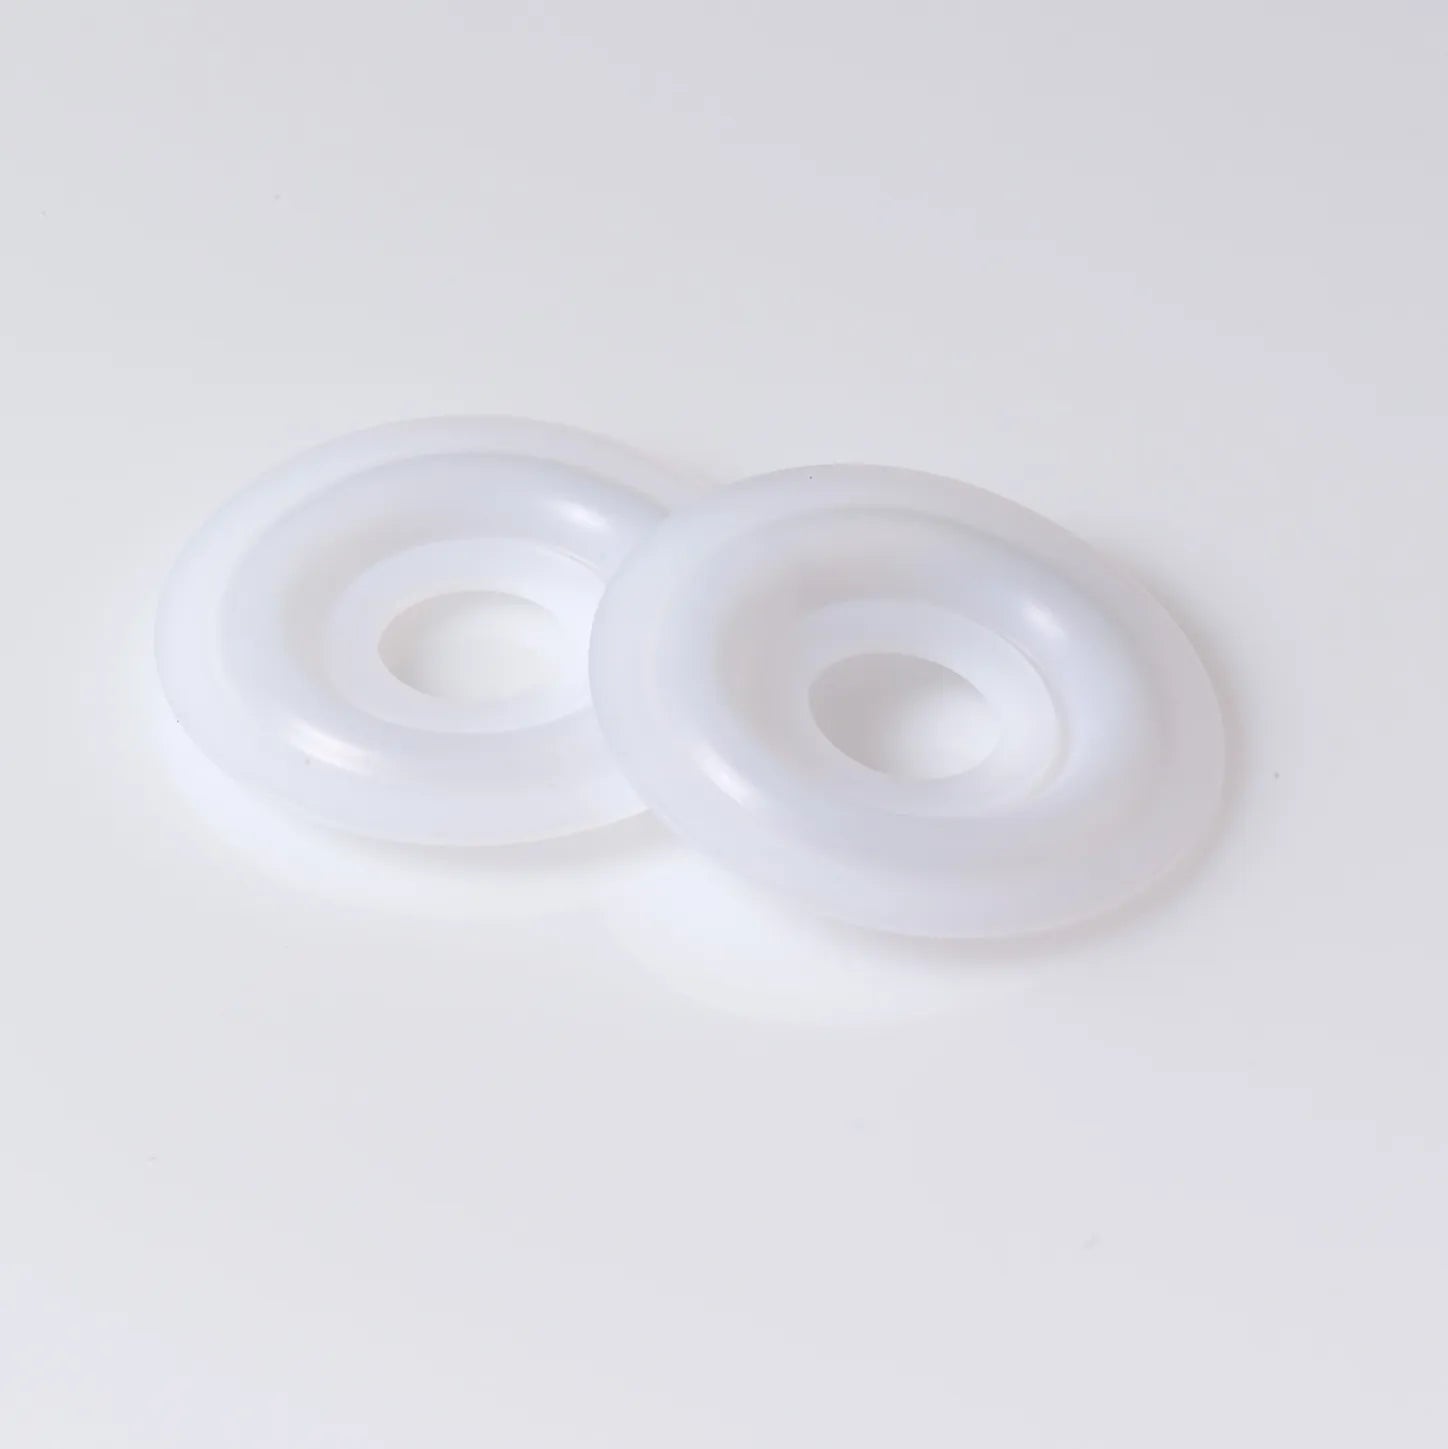 PTFE Diaphragm, LC-30AD/i-Series, 2/pk Comparable to Shimadzu # 228-55272-41